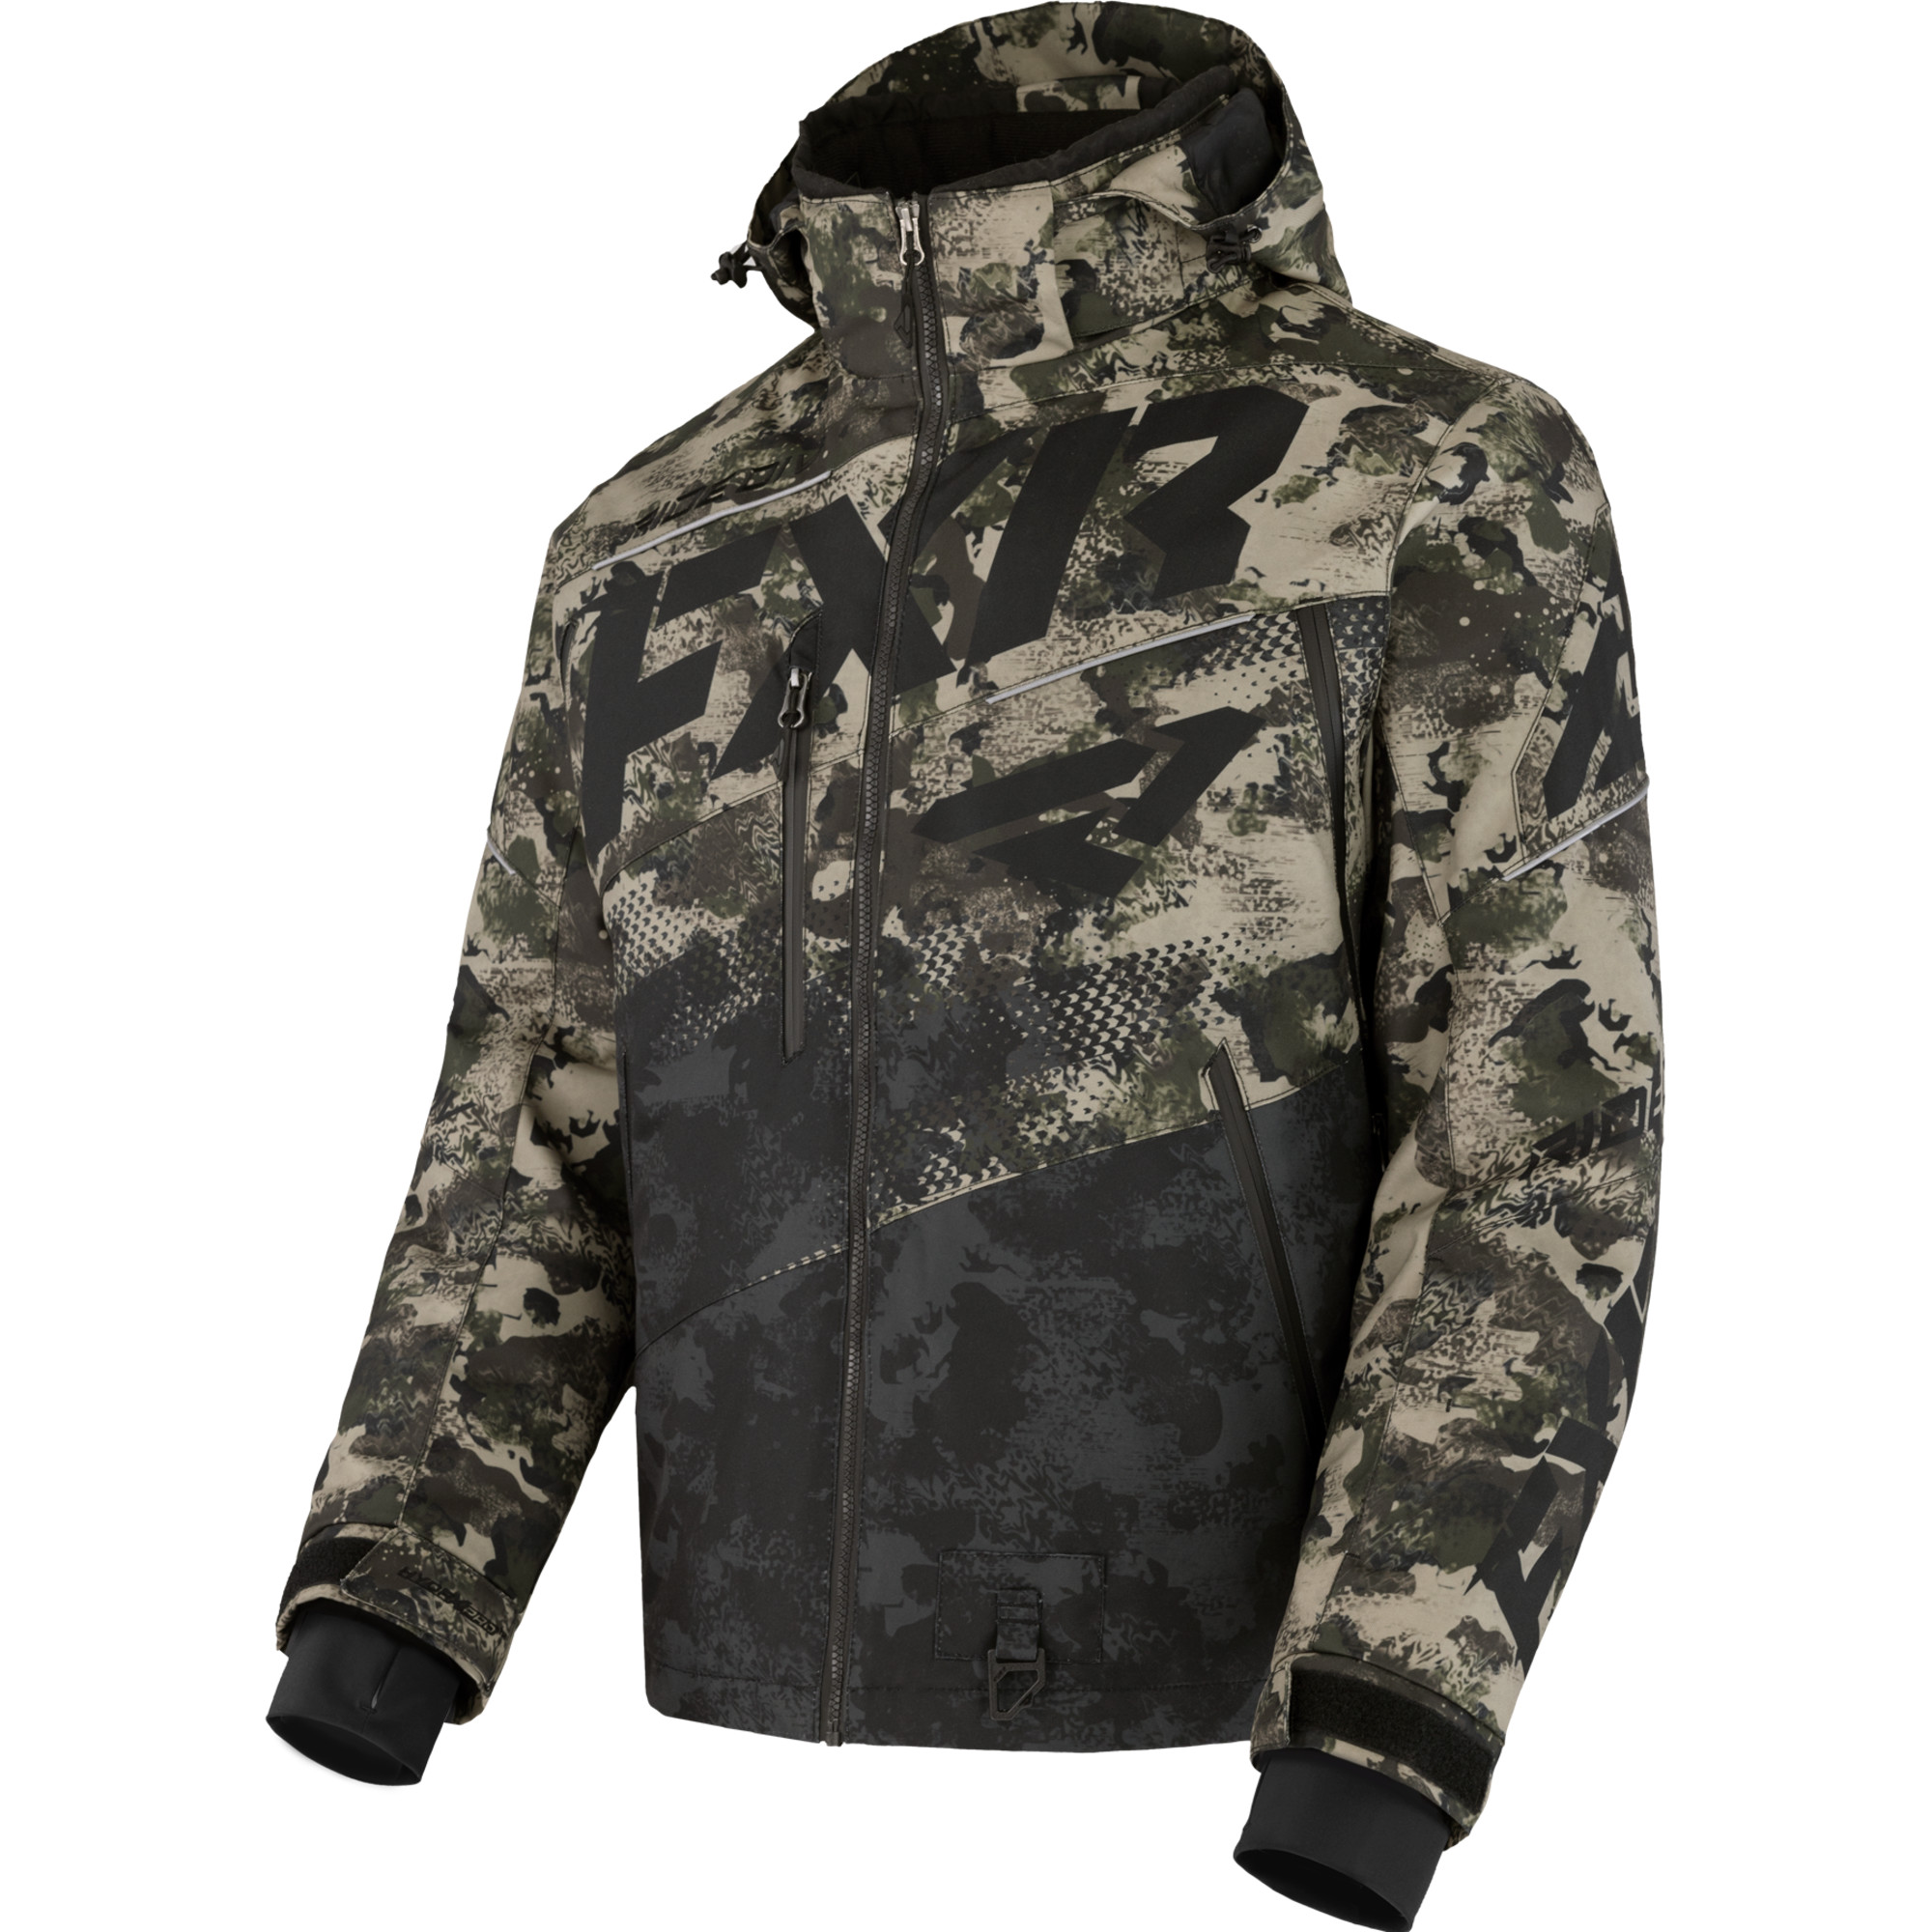 fxr racing insulated jackets for men boost fx fast